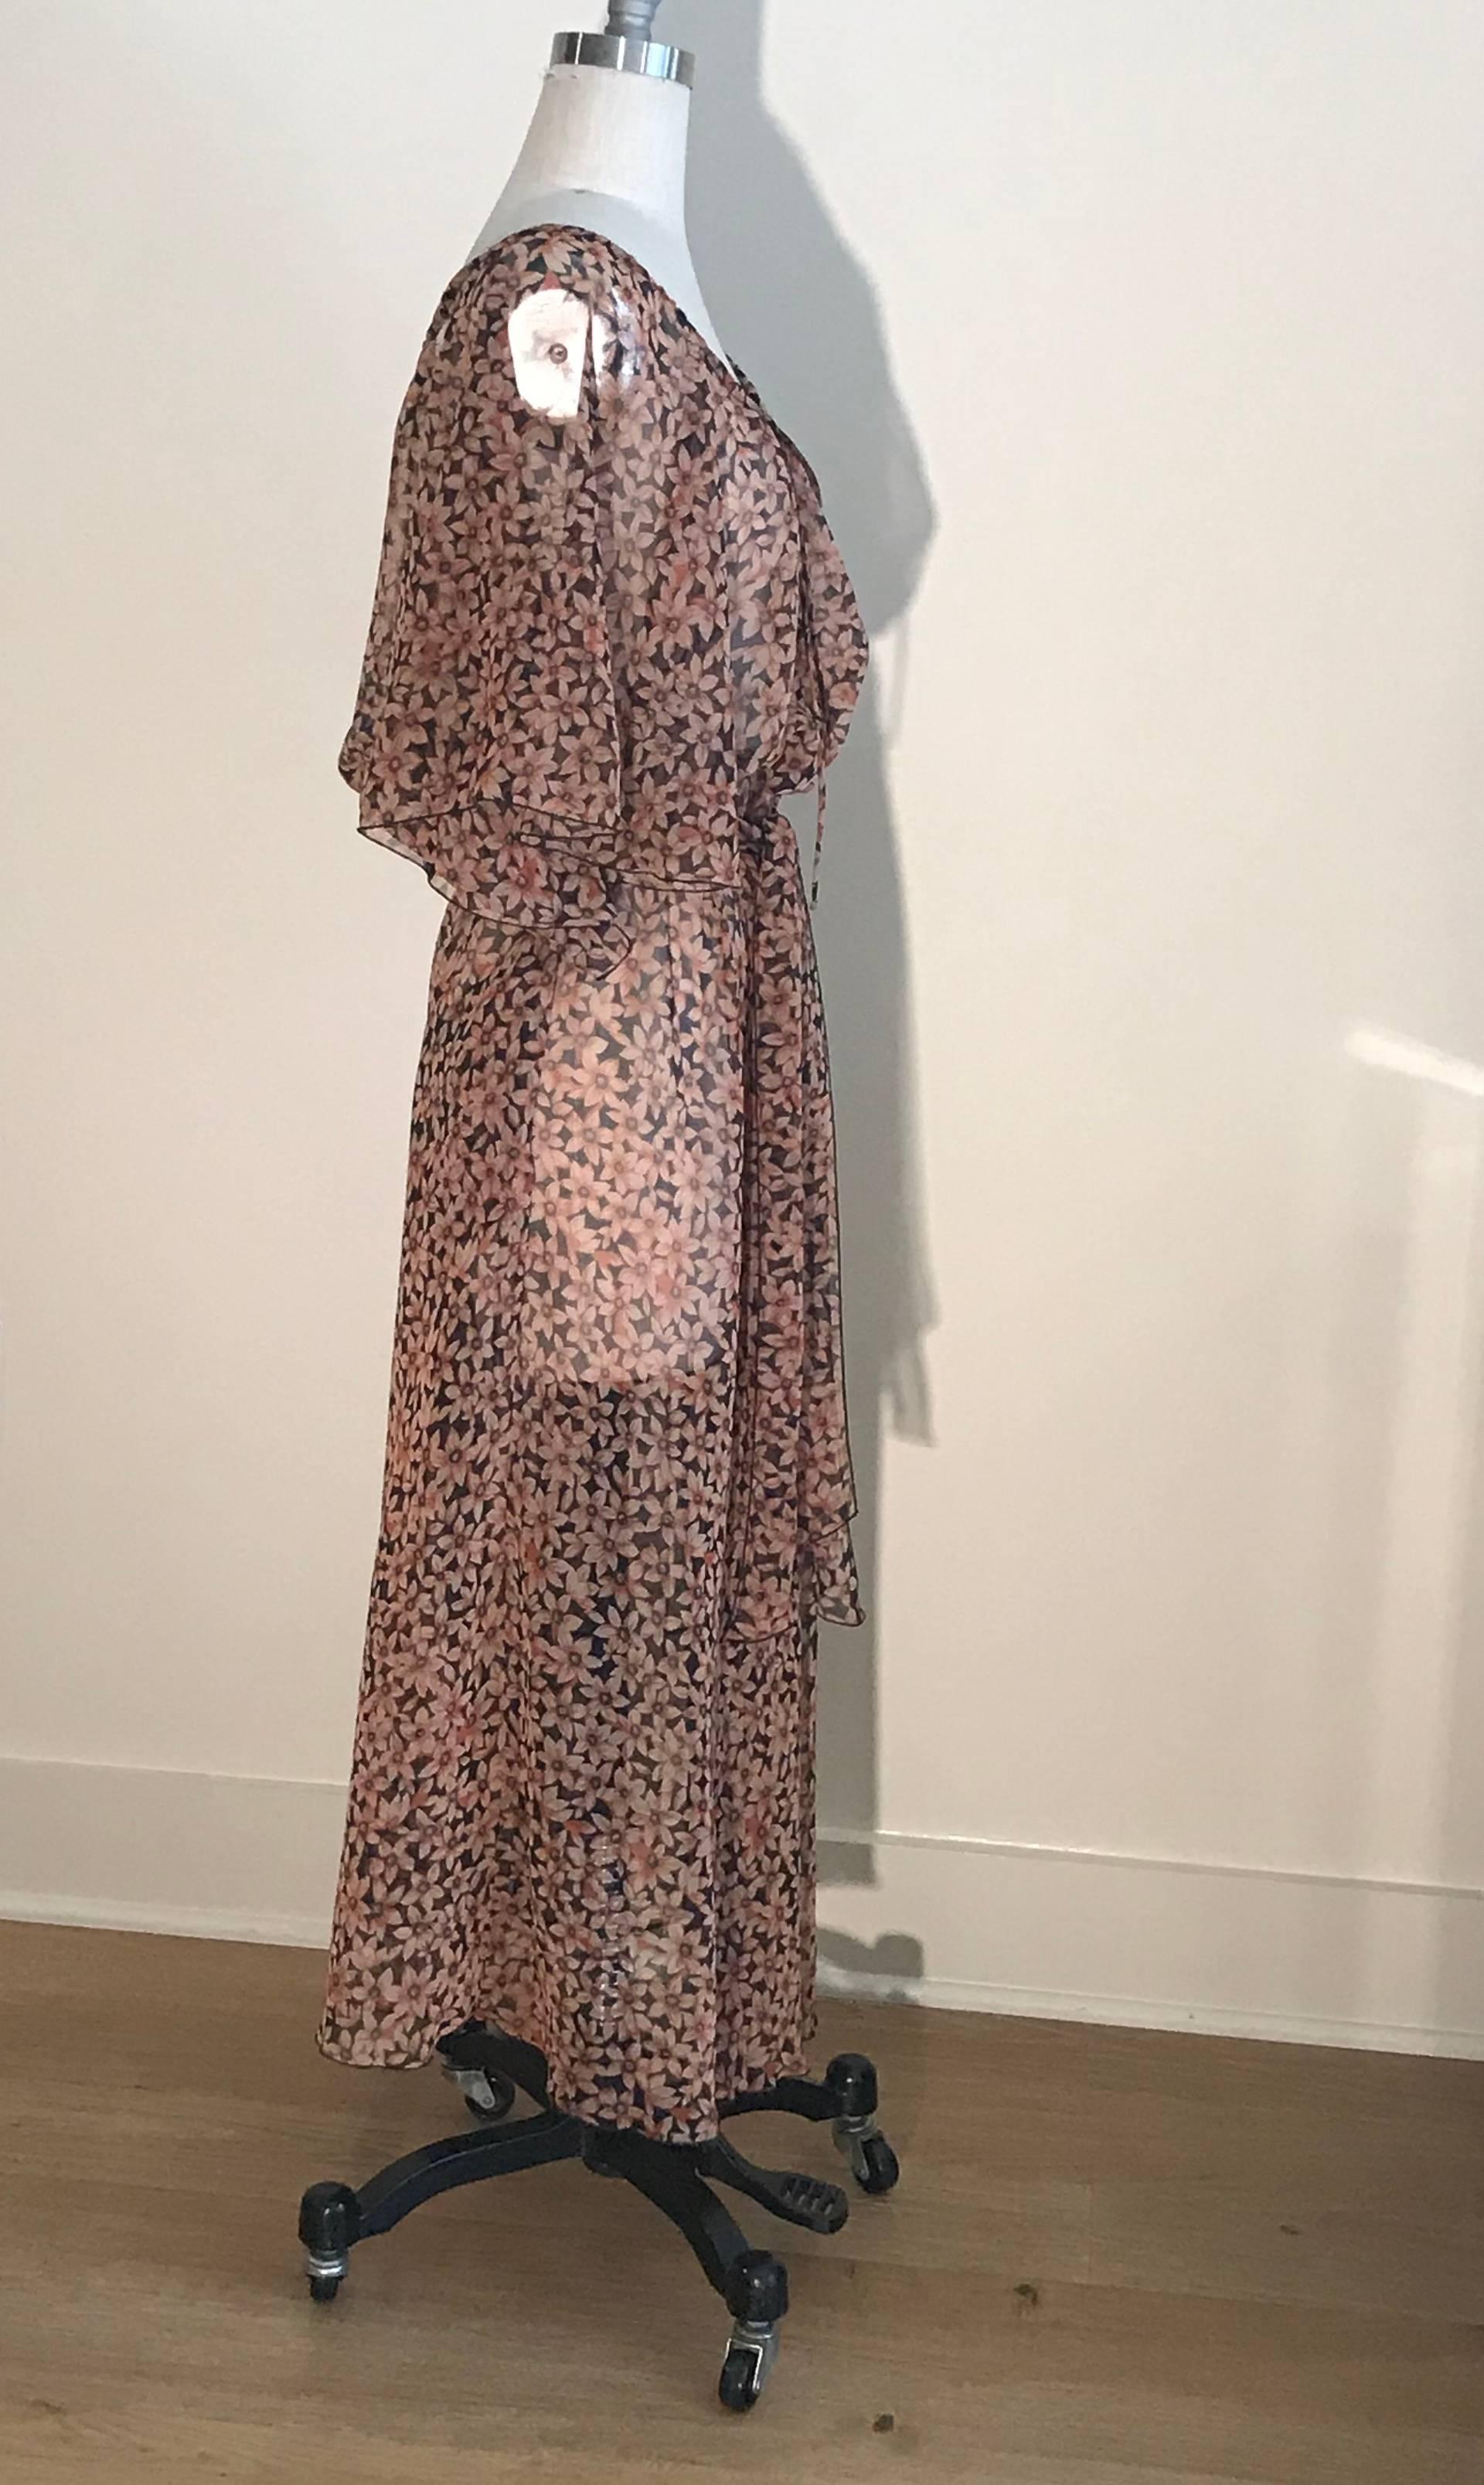 Diane von Furstenberg vintage 1980s slightly sheer belted dress in black and pink floral print. Cloth covered buttons to mid-front. Tie at neck. Flutter sleeves. 

Makes a great swim cover up for the pool or beach!

100% polyester.

Labelled size